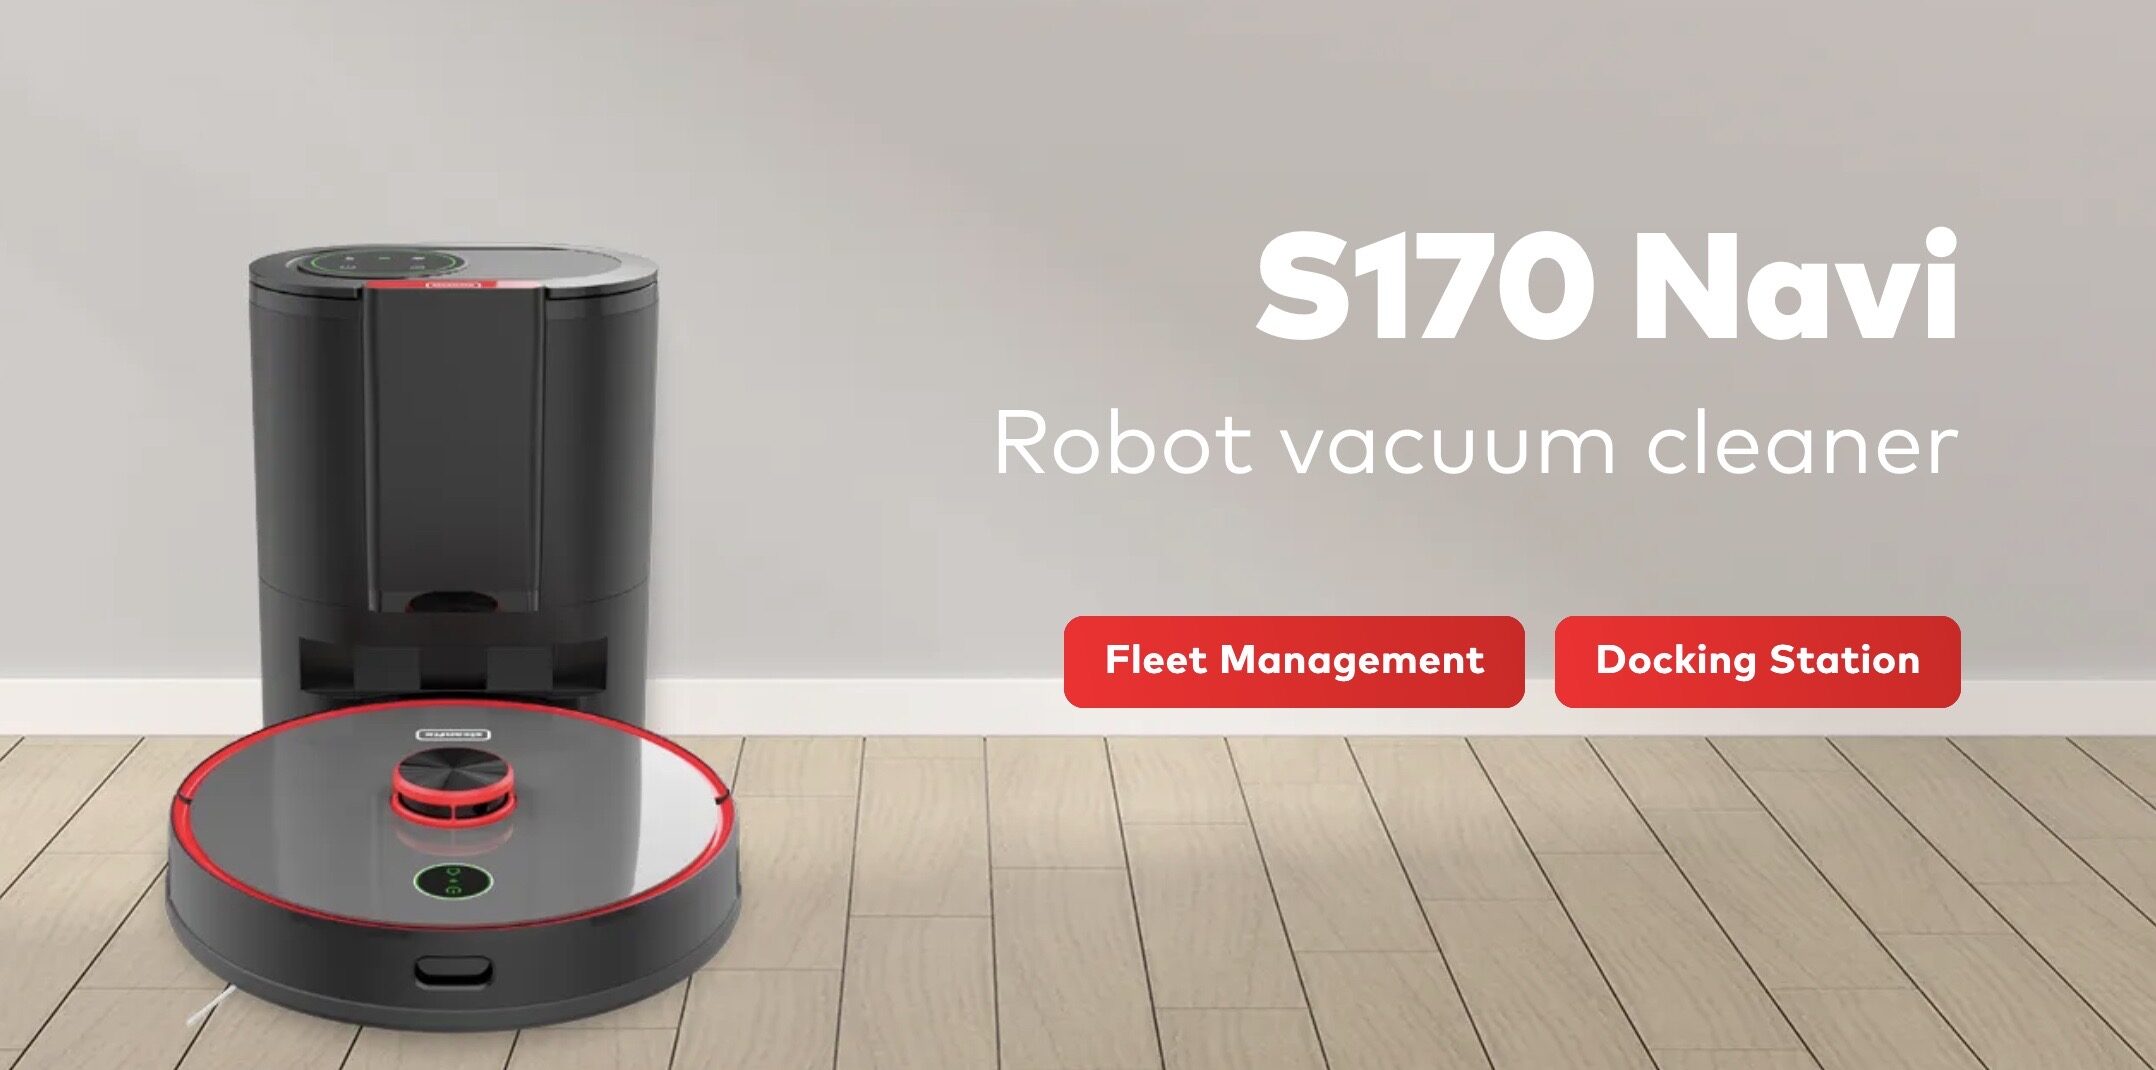 A robot vacuum cleaner is on the floor.